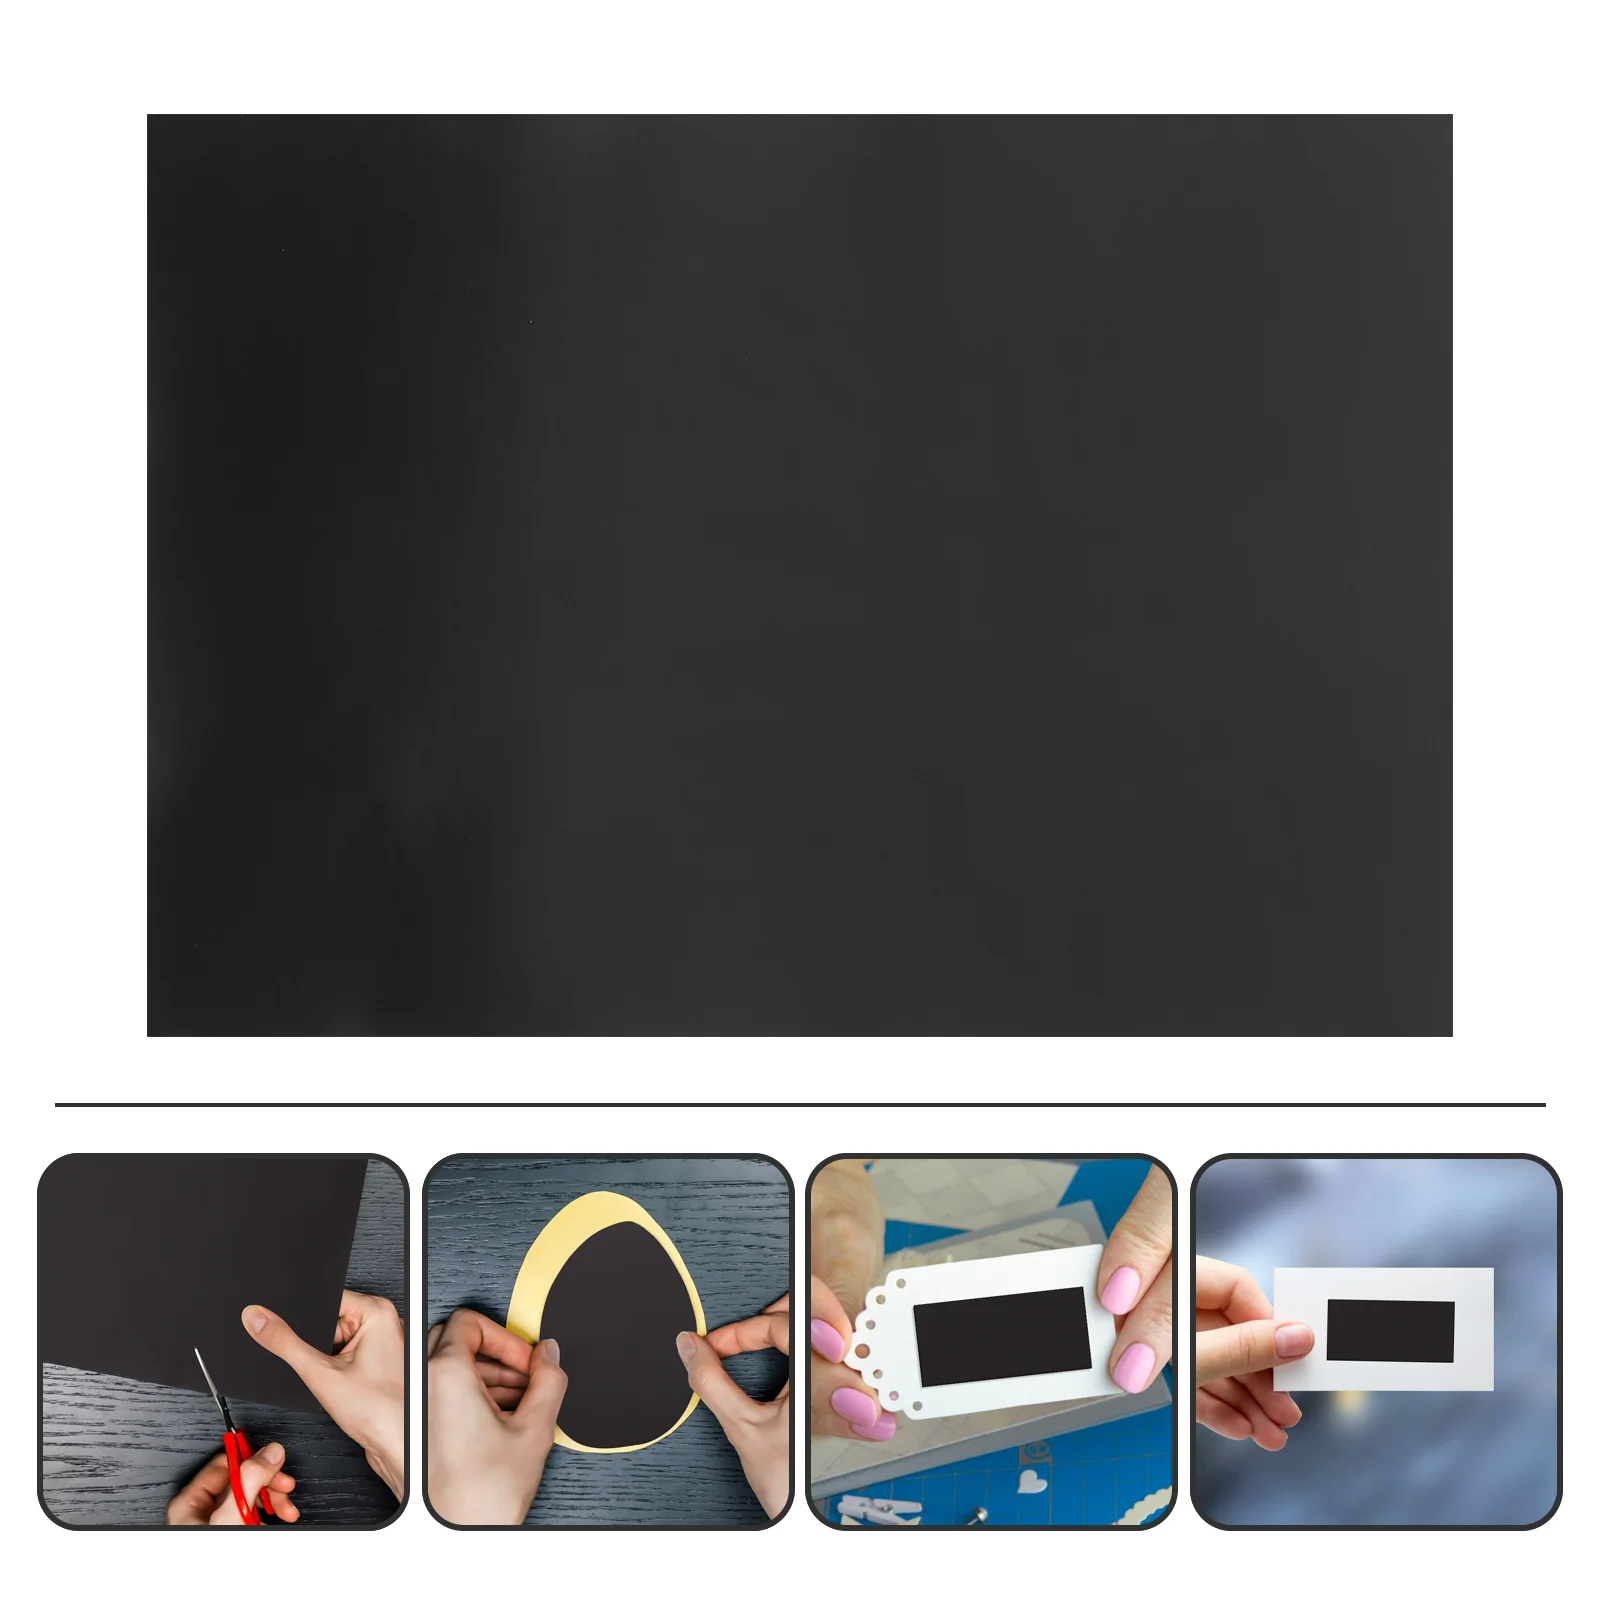 

5 Sheets Magnetic Sheet Crafting Magnetic Sheet Rubber Sheets with Adhesive Backing Adhesive Sheet